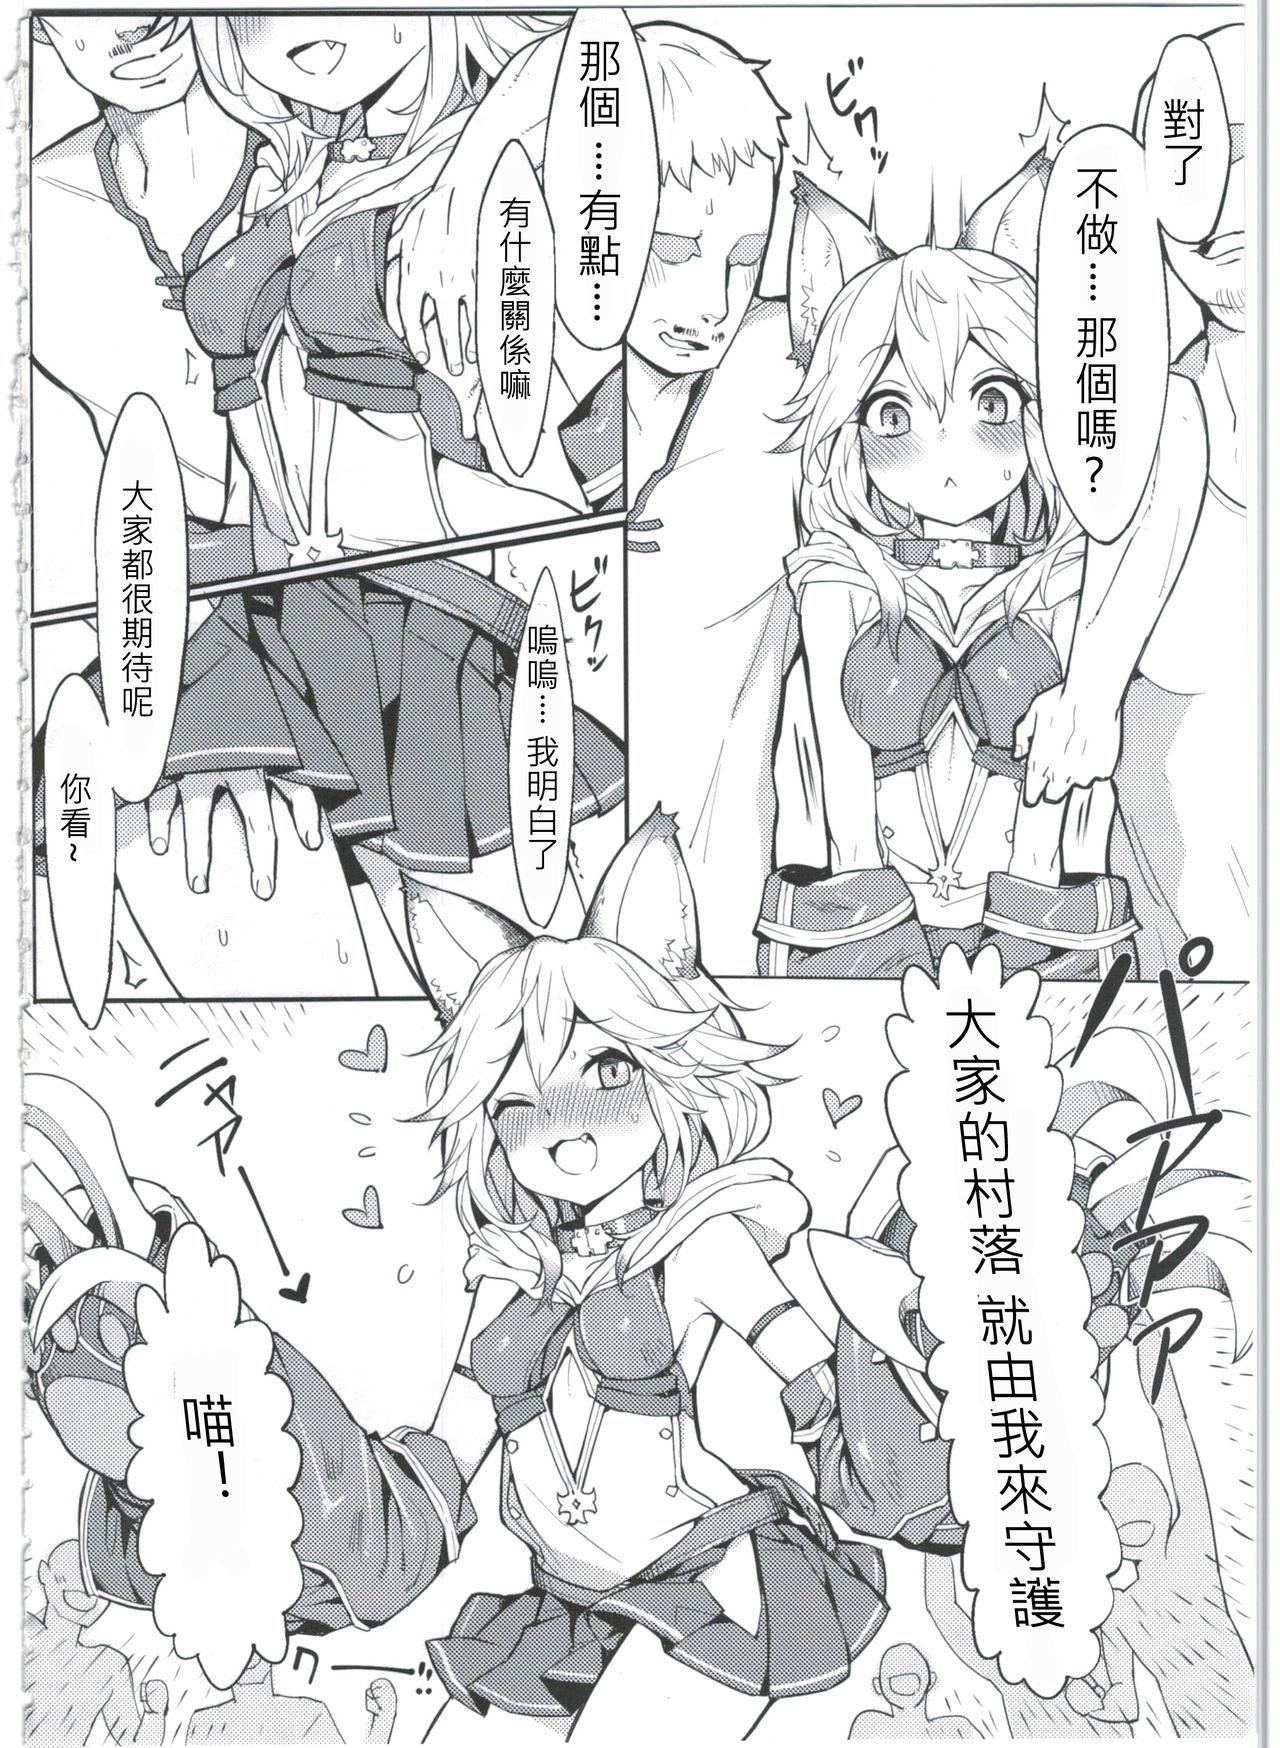 Celebrity Sen-chan! Nyan to Itte!! - Granblue fantasy Stretching - Page 4